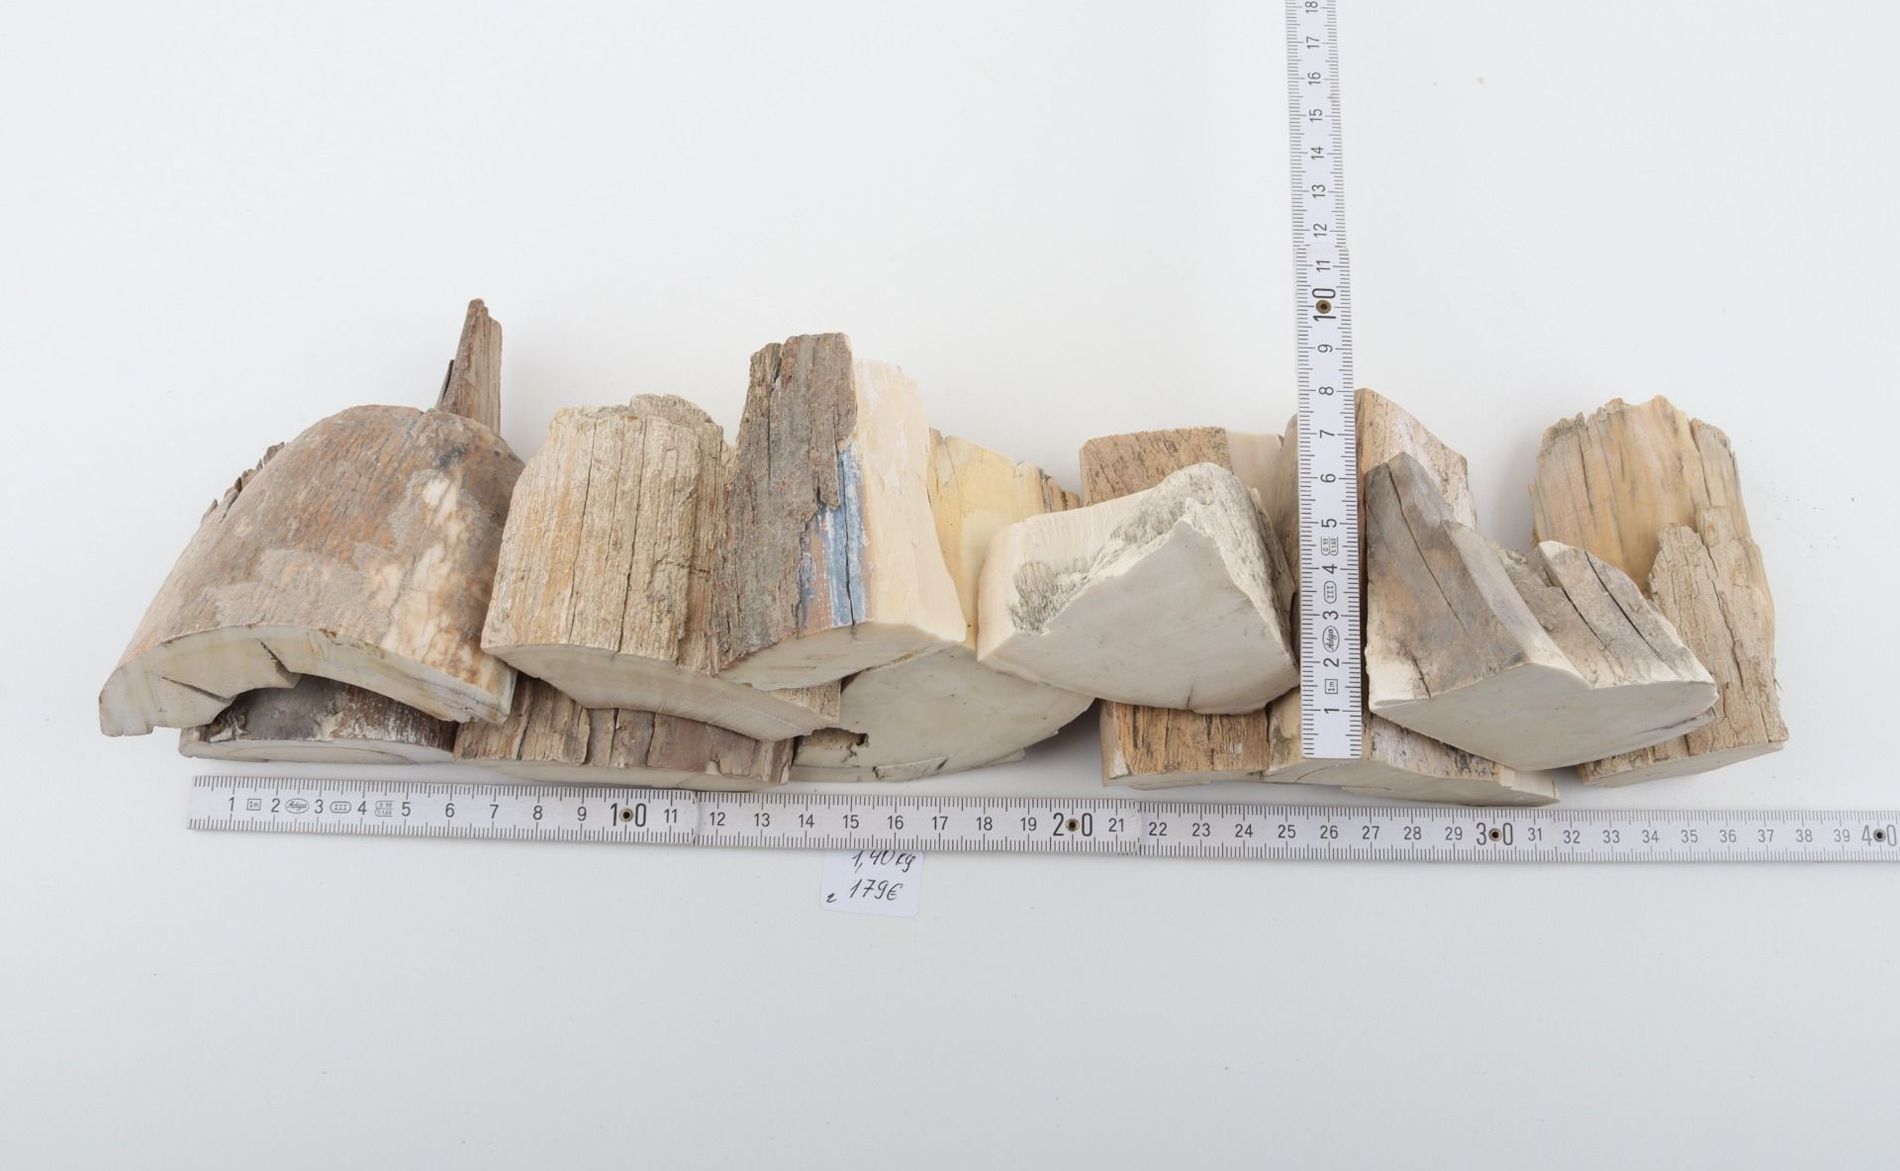 Untreated mammoth ivory pieces